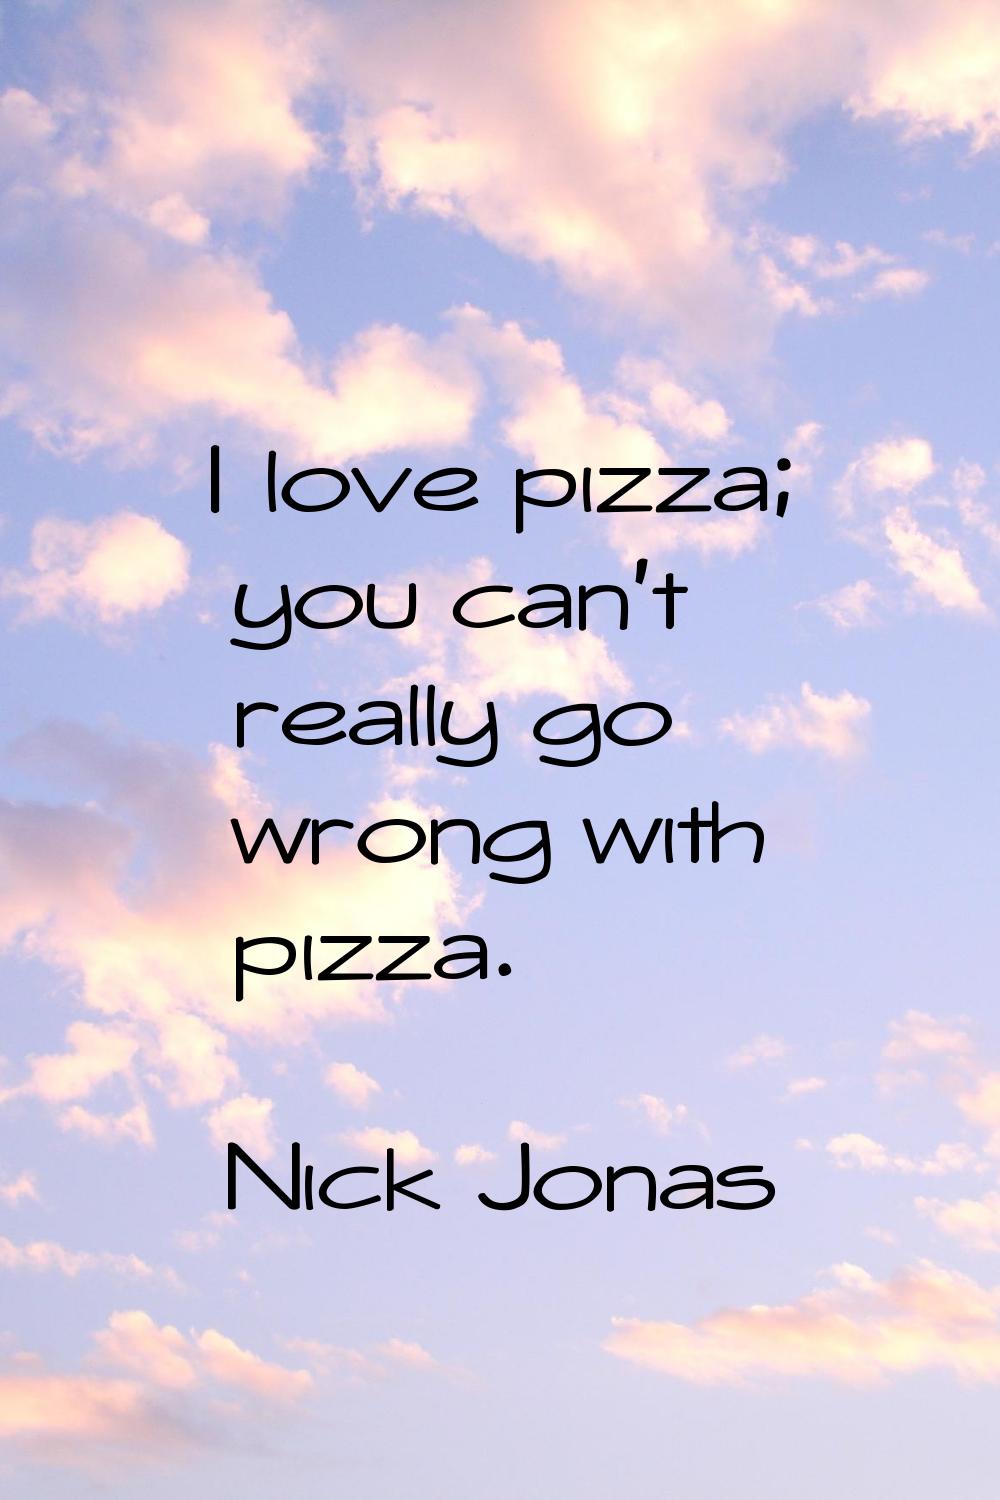 I love pizza; you can't really go wrong with pizza.